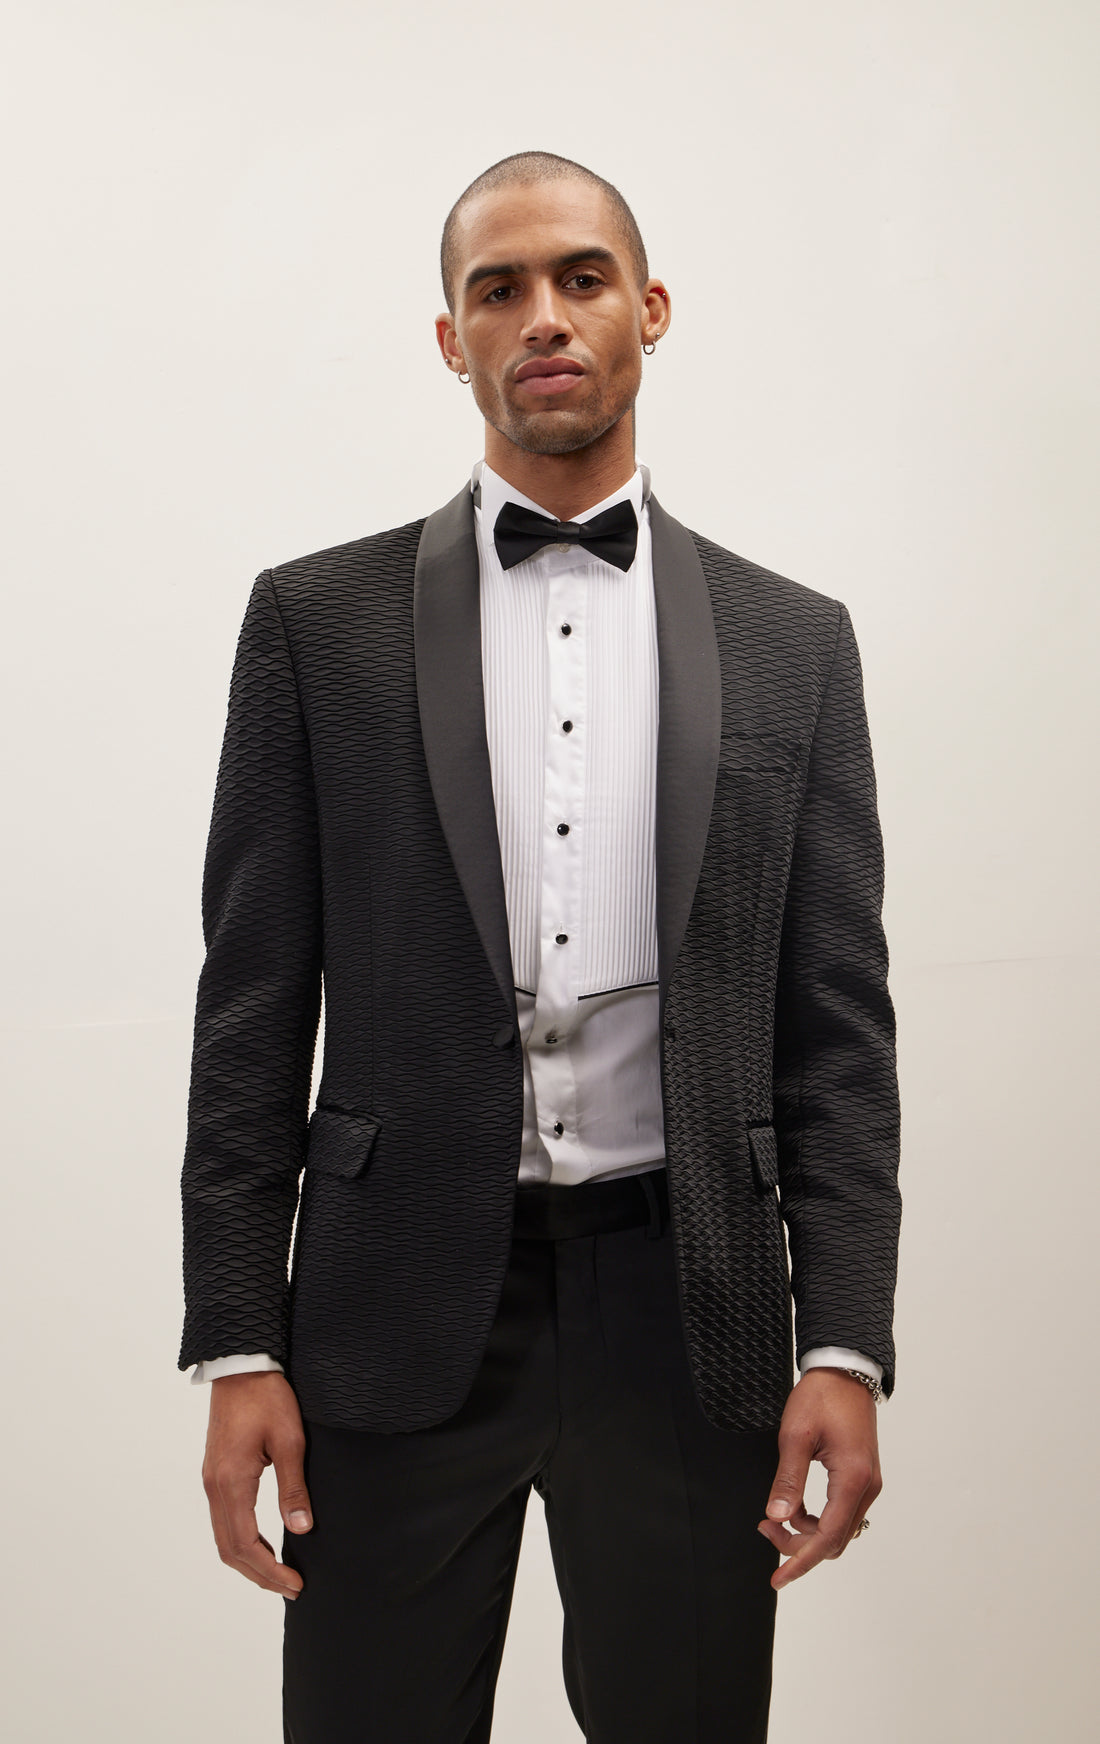 All Over Quilted Shawl Lapel Tuxedo Jacket - Black